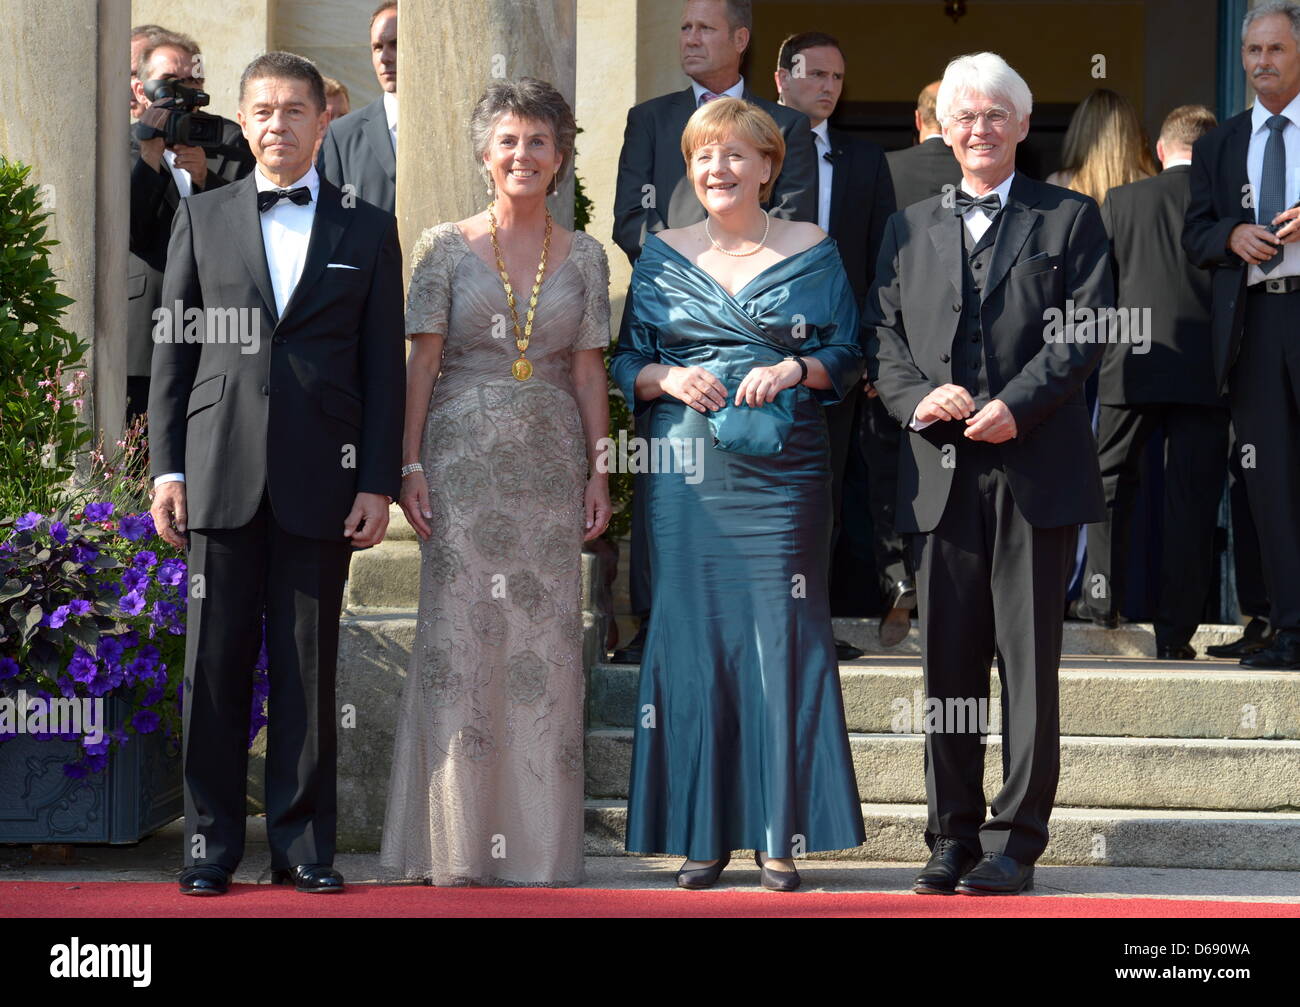 German Chancellor Angela Merkel (CDU, 2.v.r.) and her husband Joachim Sauer (l) Brigitte Merk-Erbe (FW, 2.v.l.), mayor of Bayreuth, and her husband Thomas Erbe (r) arrive at the opening of the Bayreuth Festival 2012 in Bayreuth, Germany, 25 July 2012. The one-month festival is Germany's most prestigious culture event. Photo: Tobias Hase dpa/lby Stock Photo